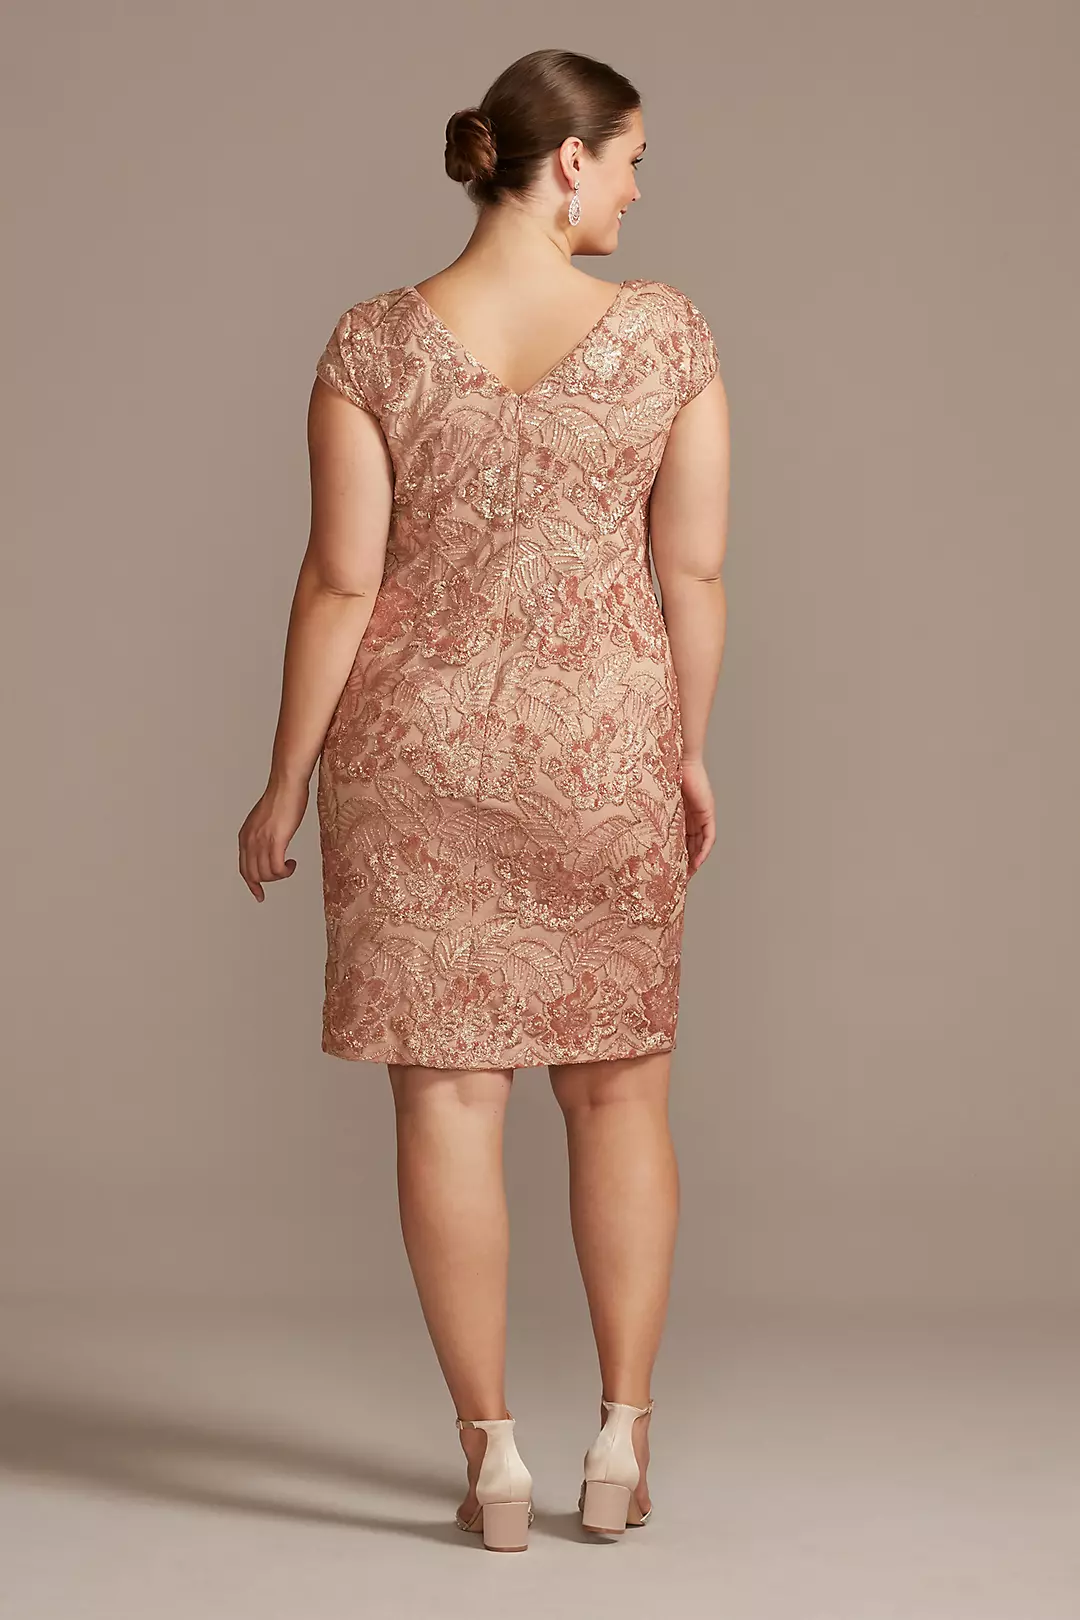 Sequin Lace Plus Size Sheath with Cap Sleeves Image 2